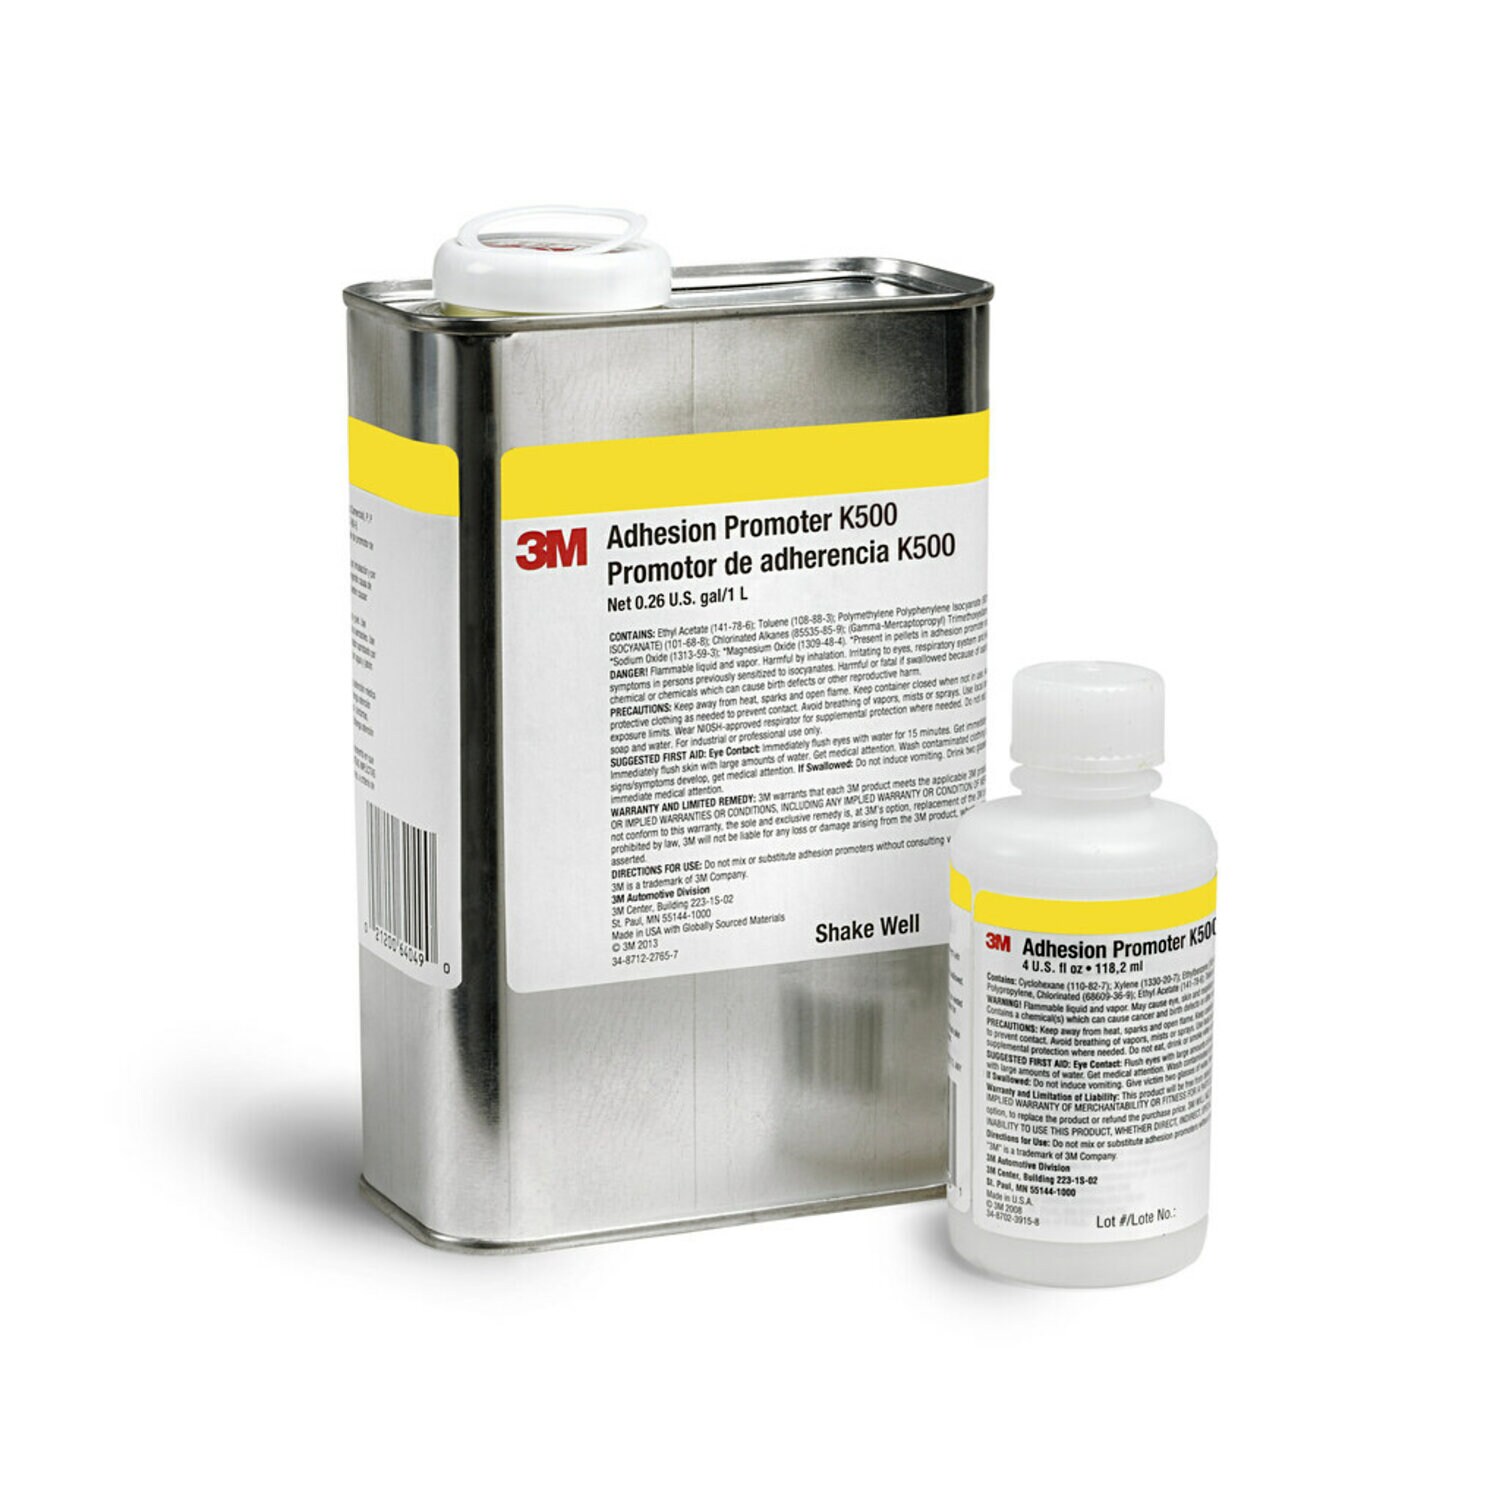 7000008223 - 3M Adhesion Promoter K500, 1 L Can, 12 Can/Case